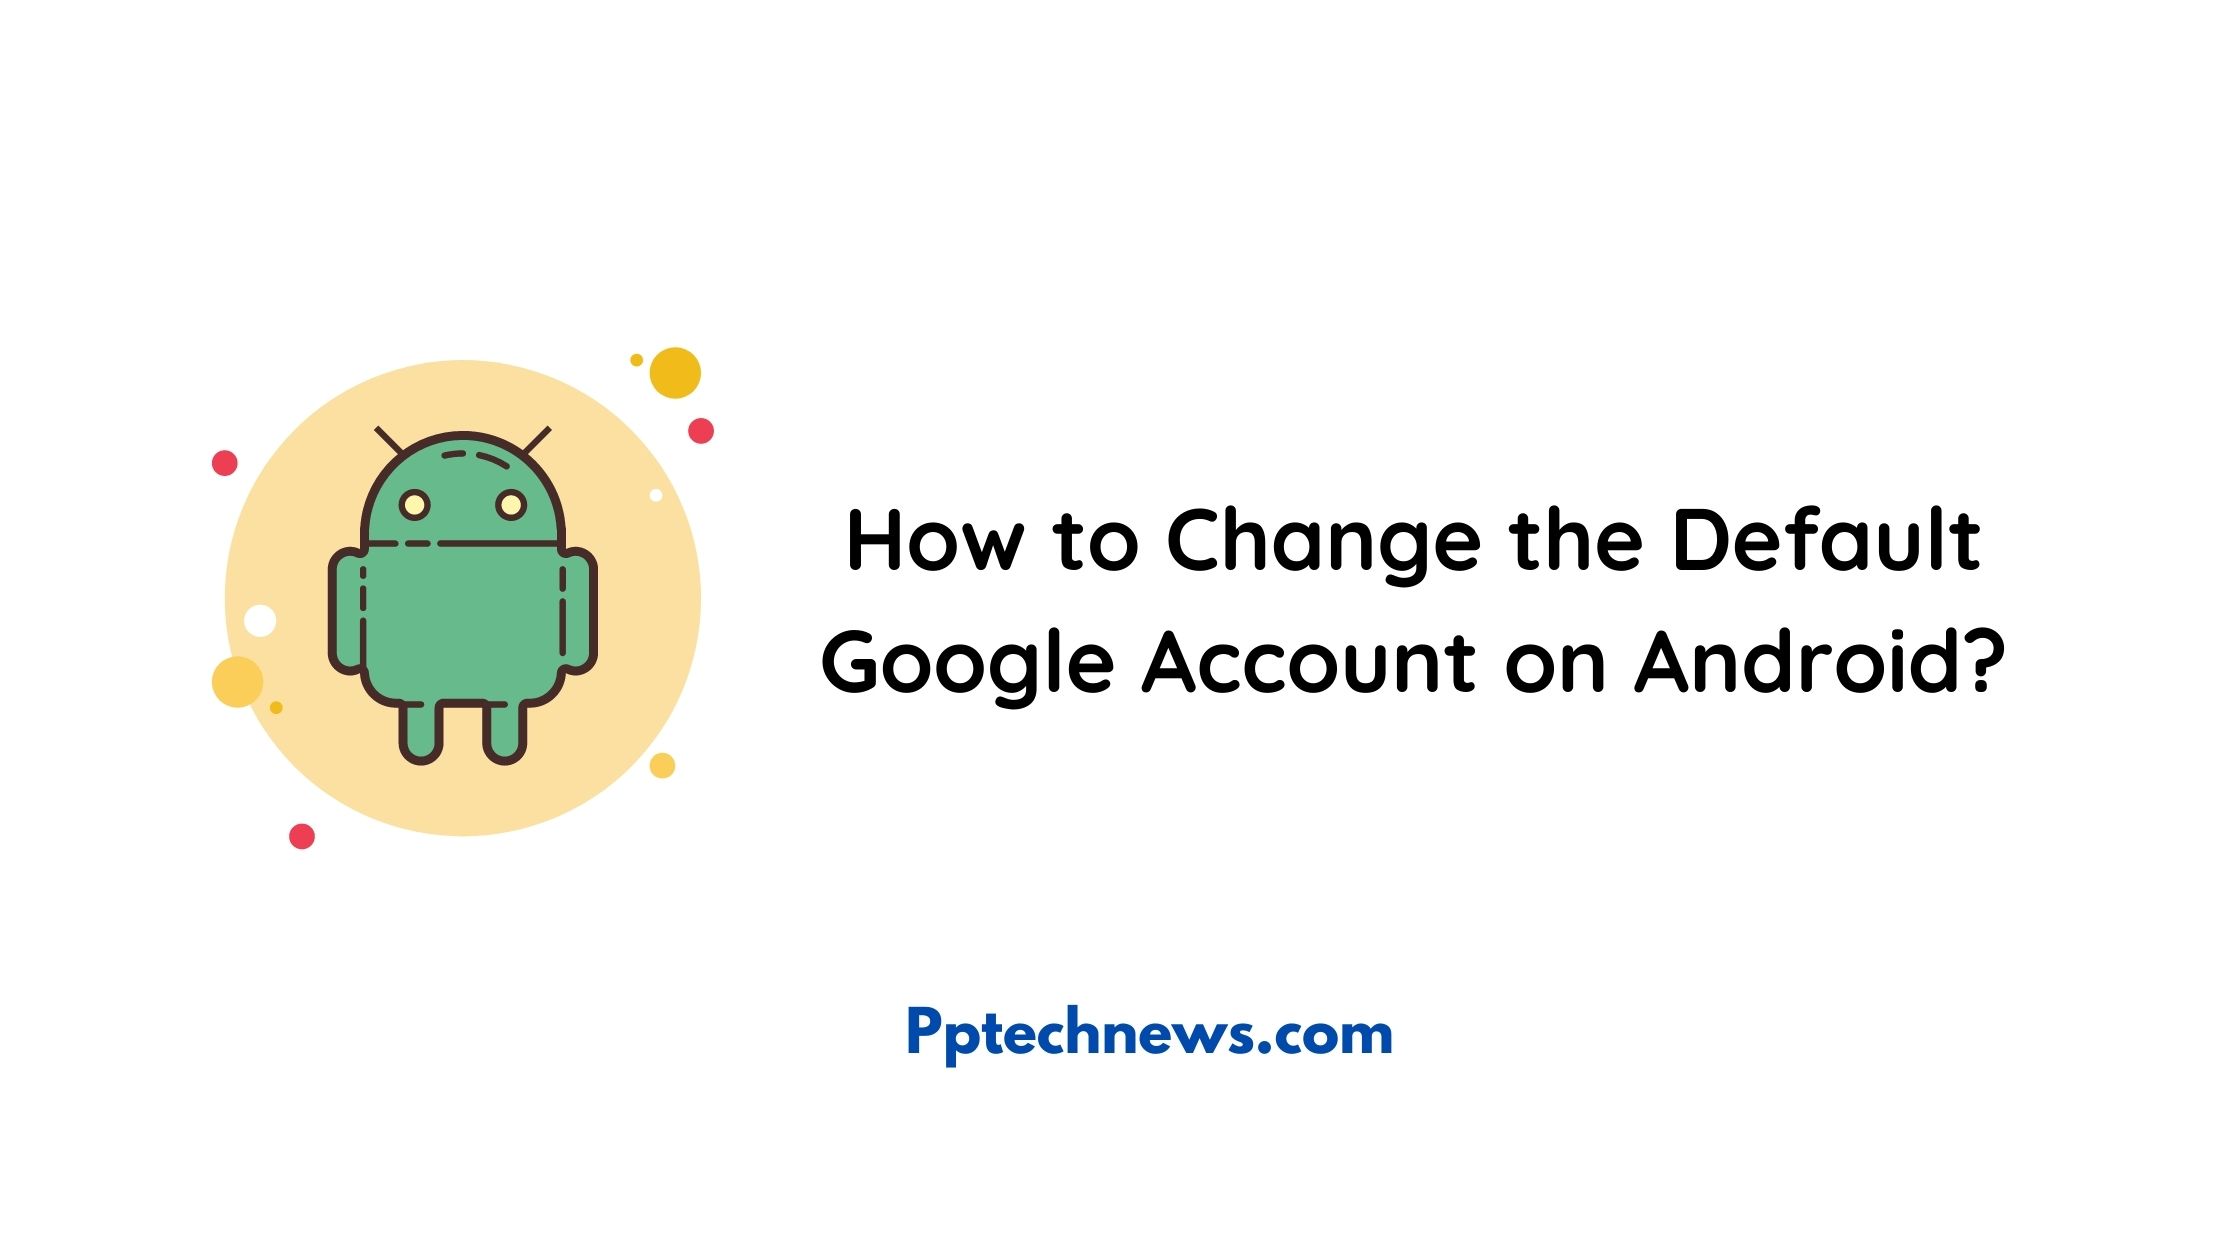 How to Change the Default Google Account on Android